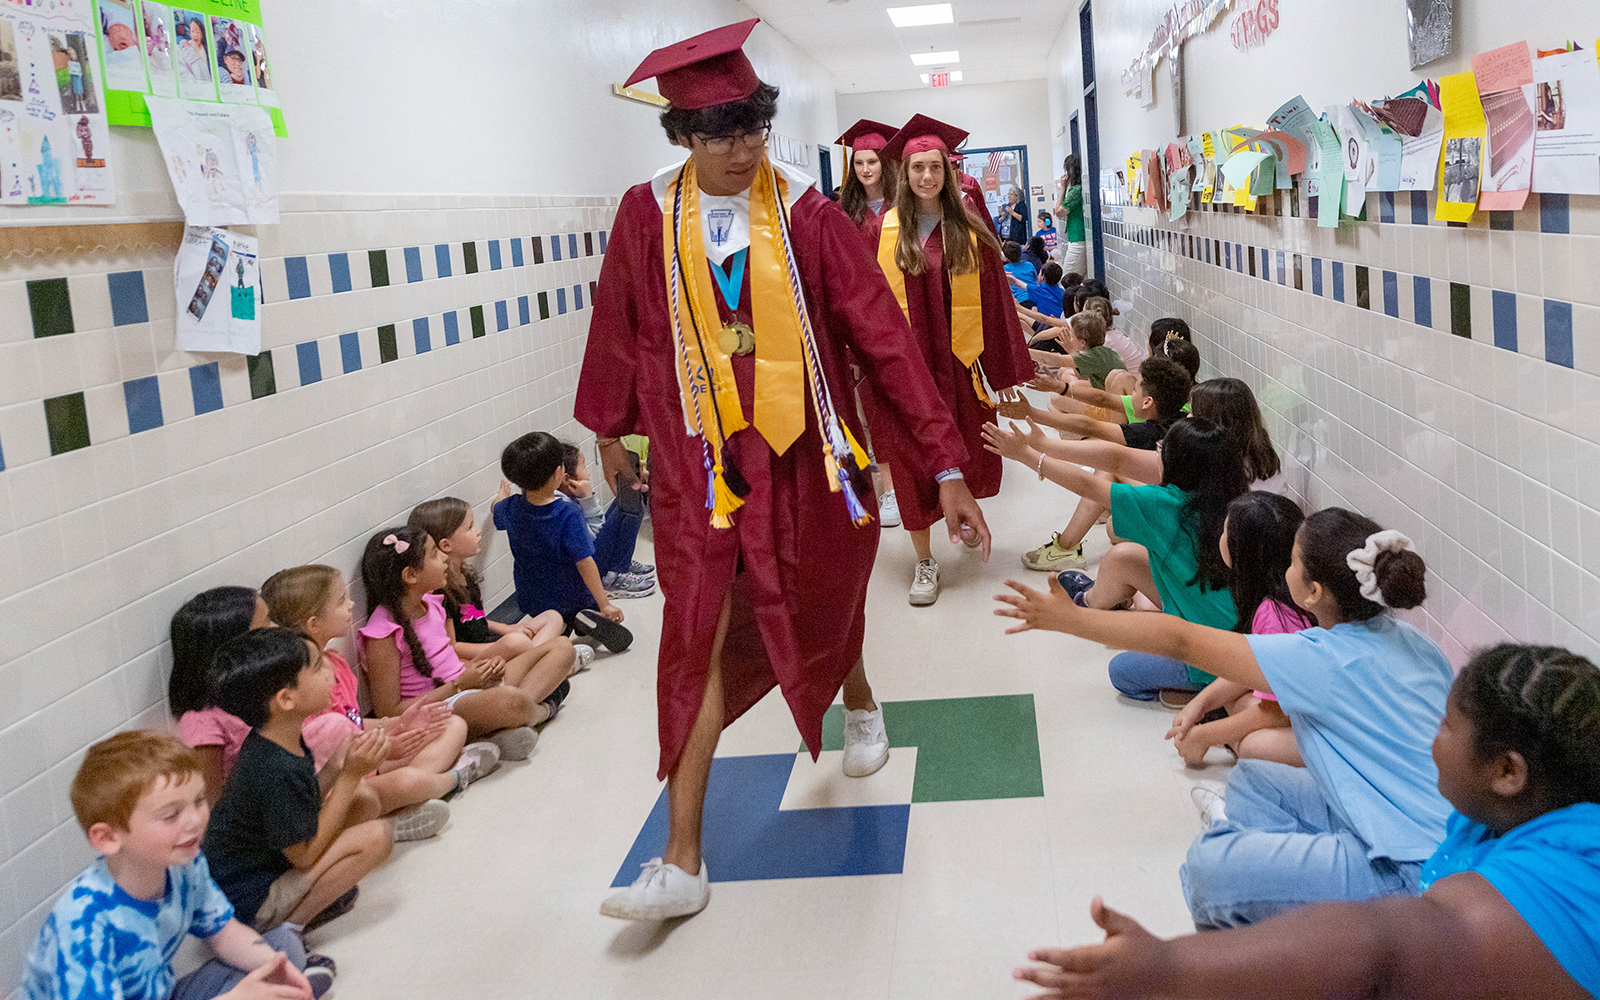 Graduates dressed in gowns walk down the hall of an elementary school